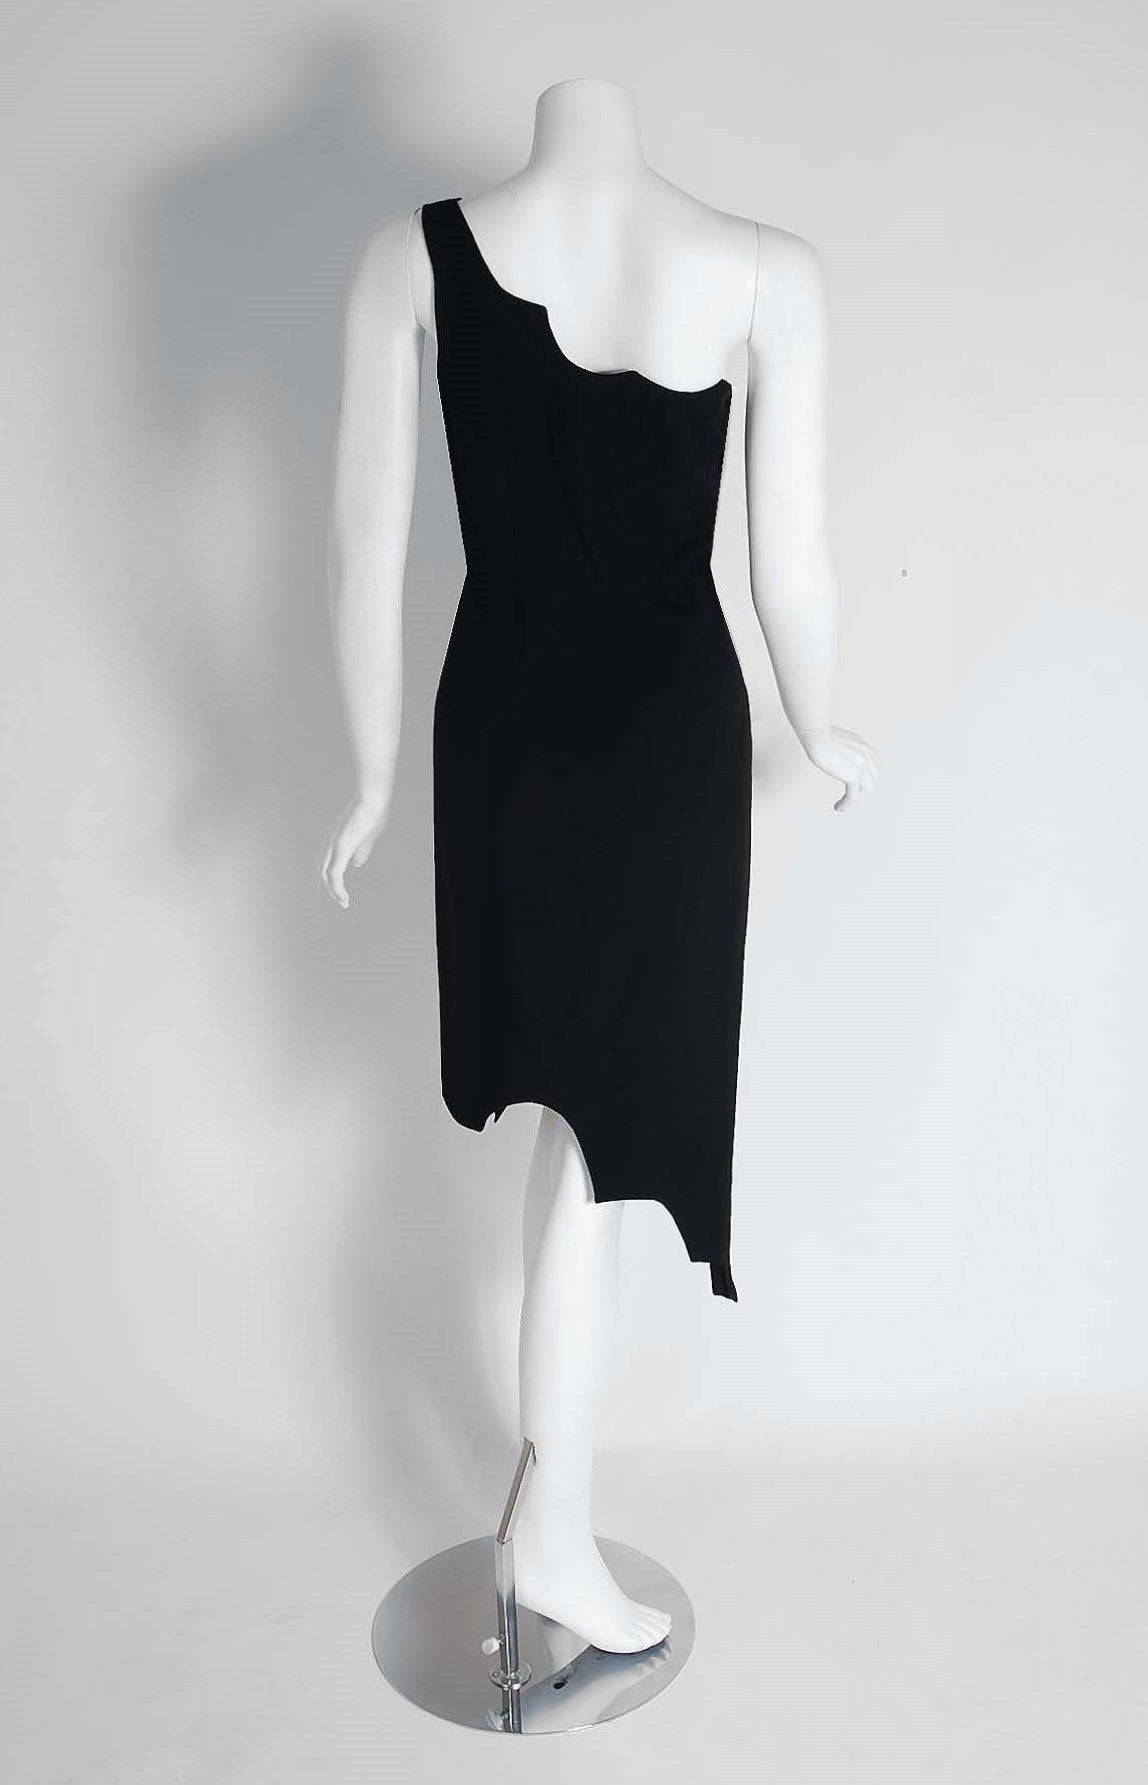 Women's 1990's Moschino Black One-Shoulder Asymmetric Scalloped Cocktail Dress